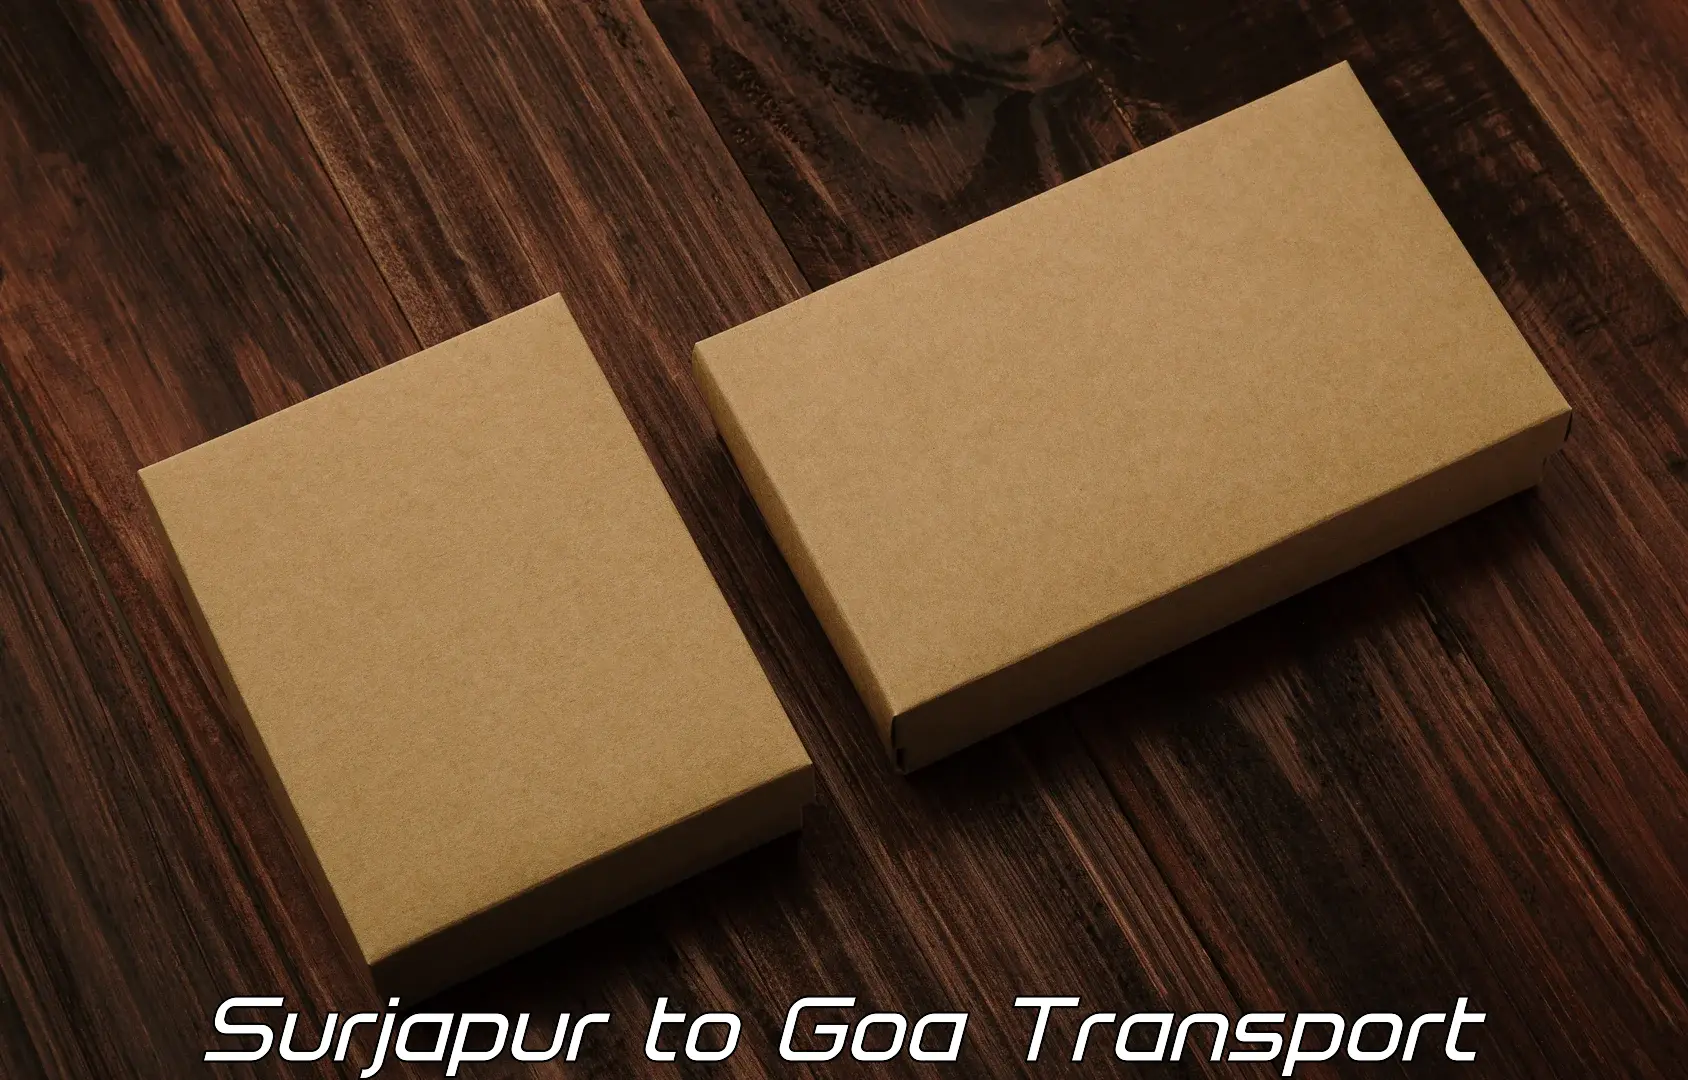 Transport shared services in Surjapur to Goa University